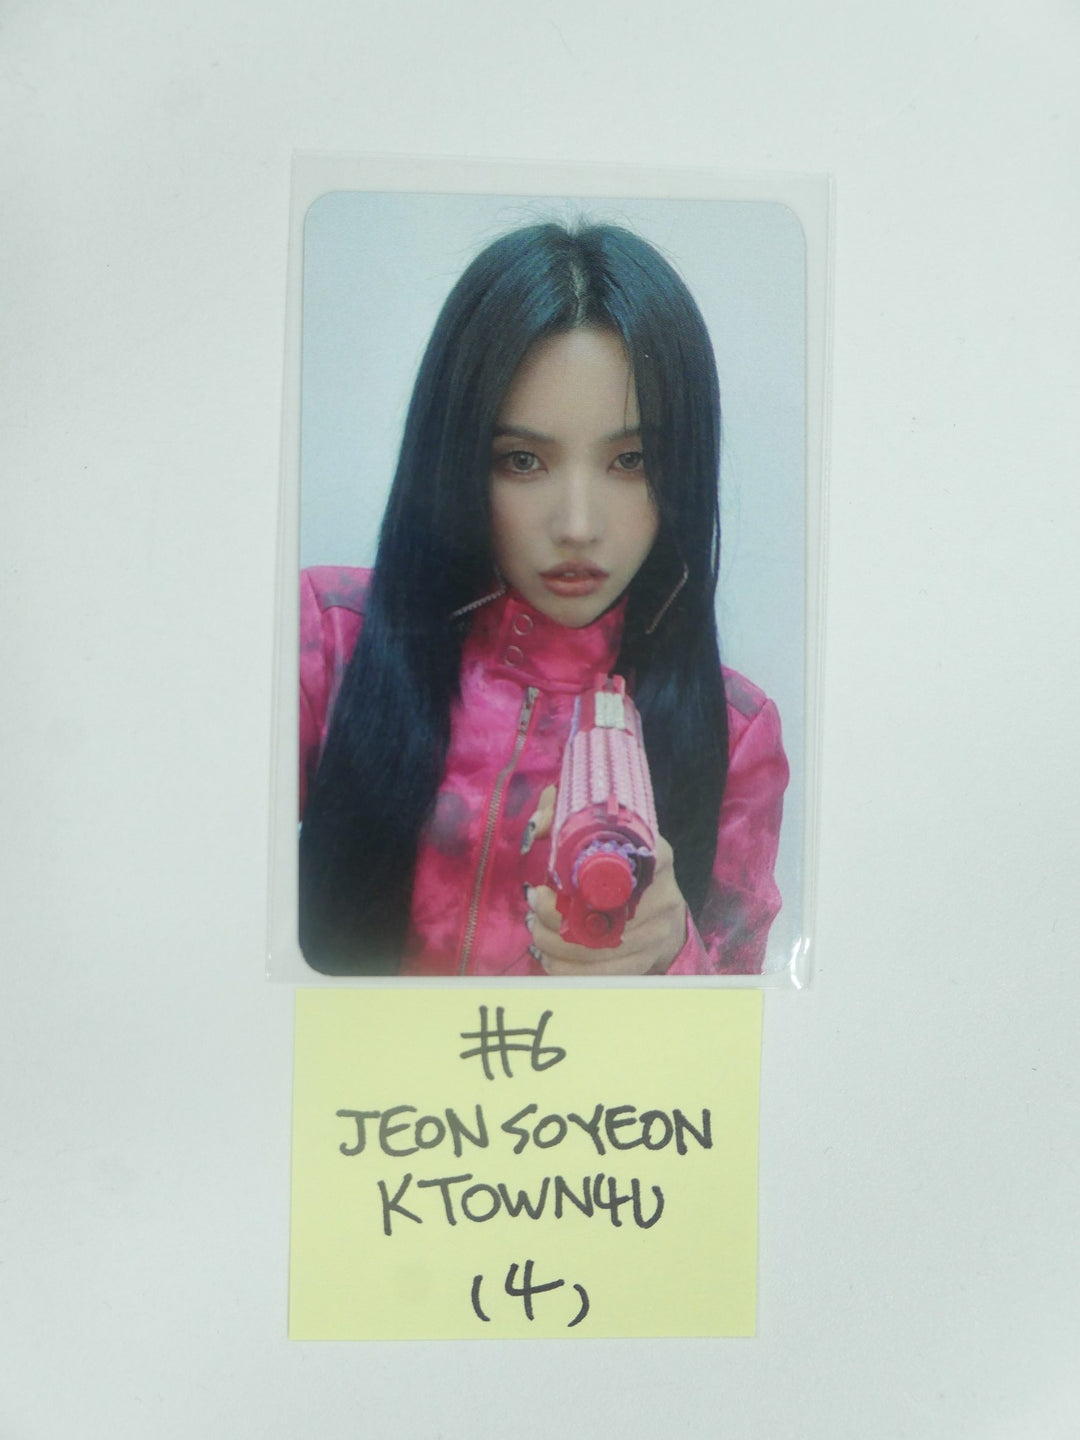 (g) I-DLE "I NEVER DIE" - Ktown4U Luckydraw Event Photocard